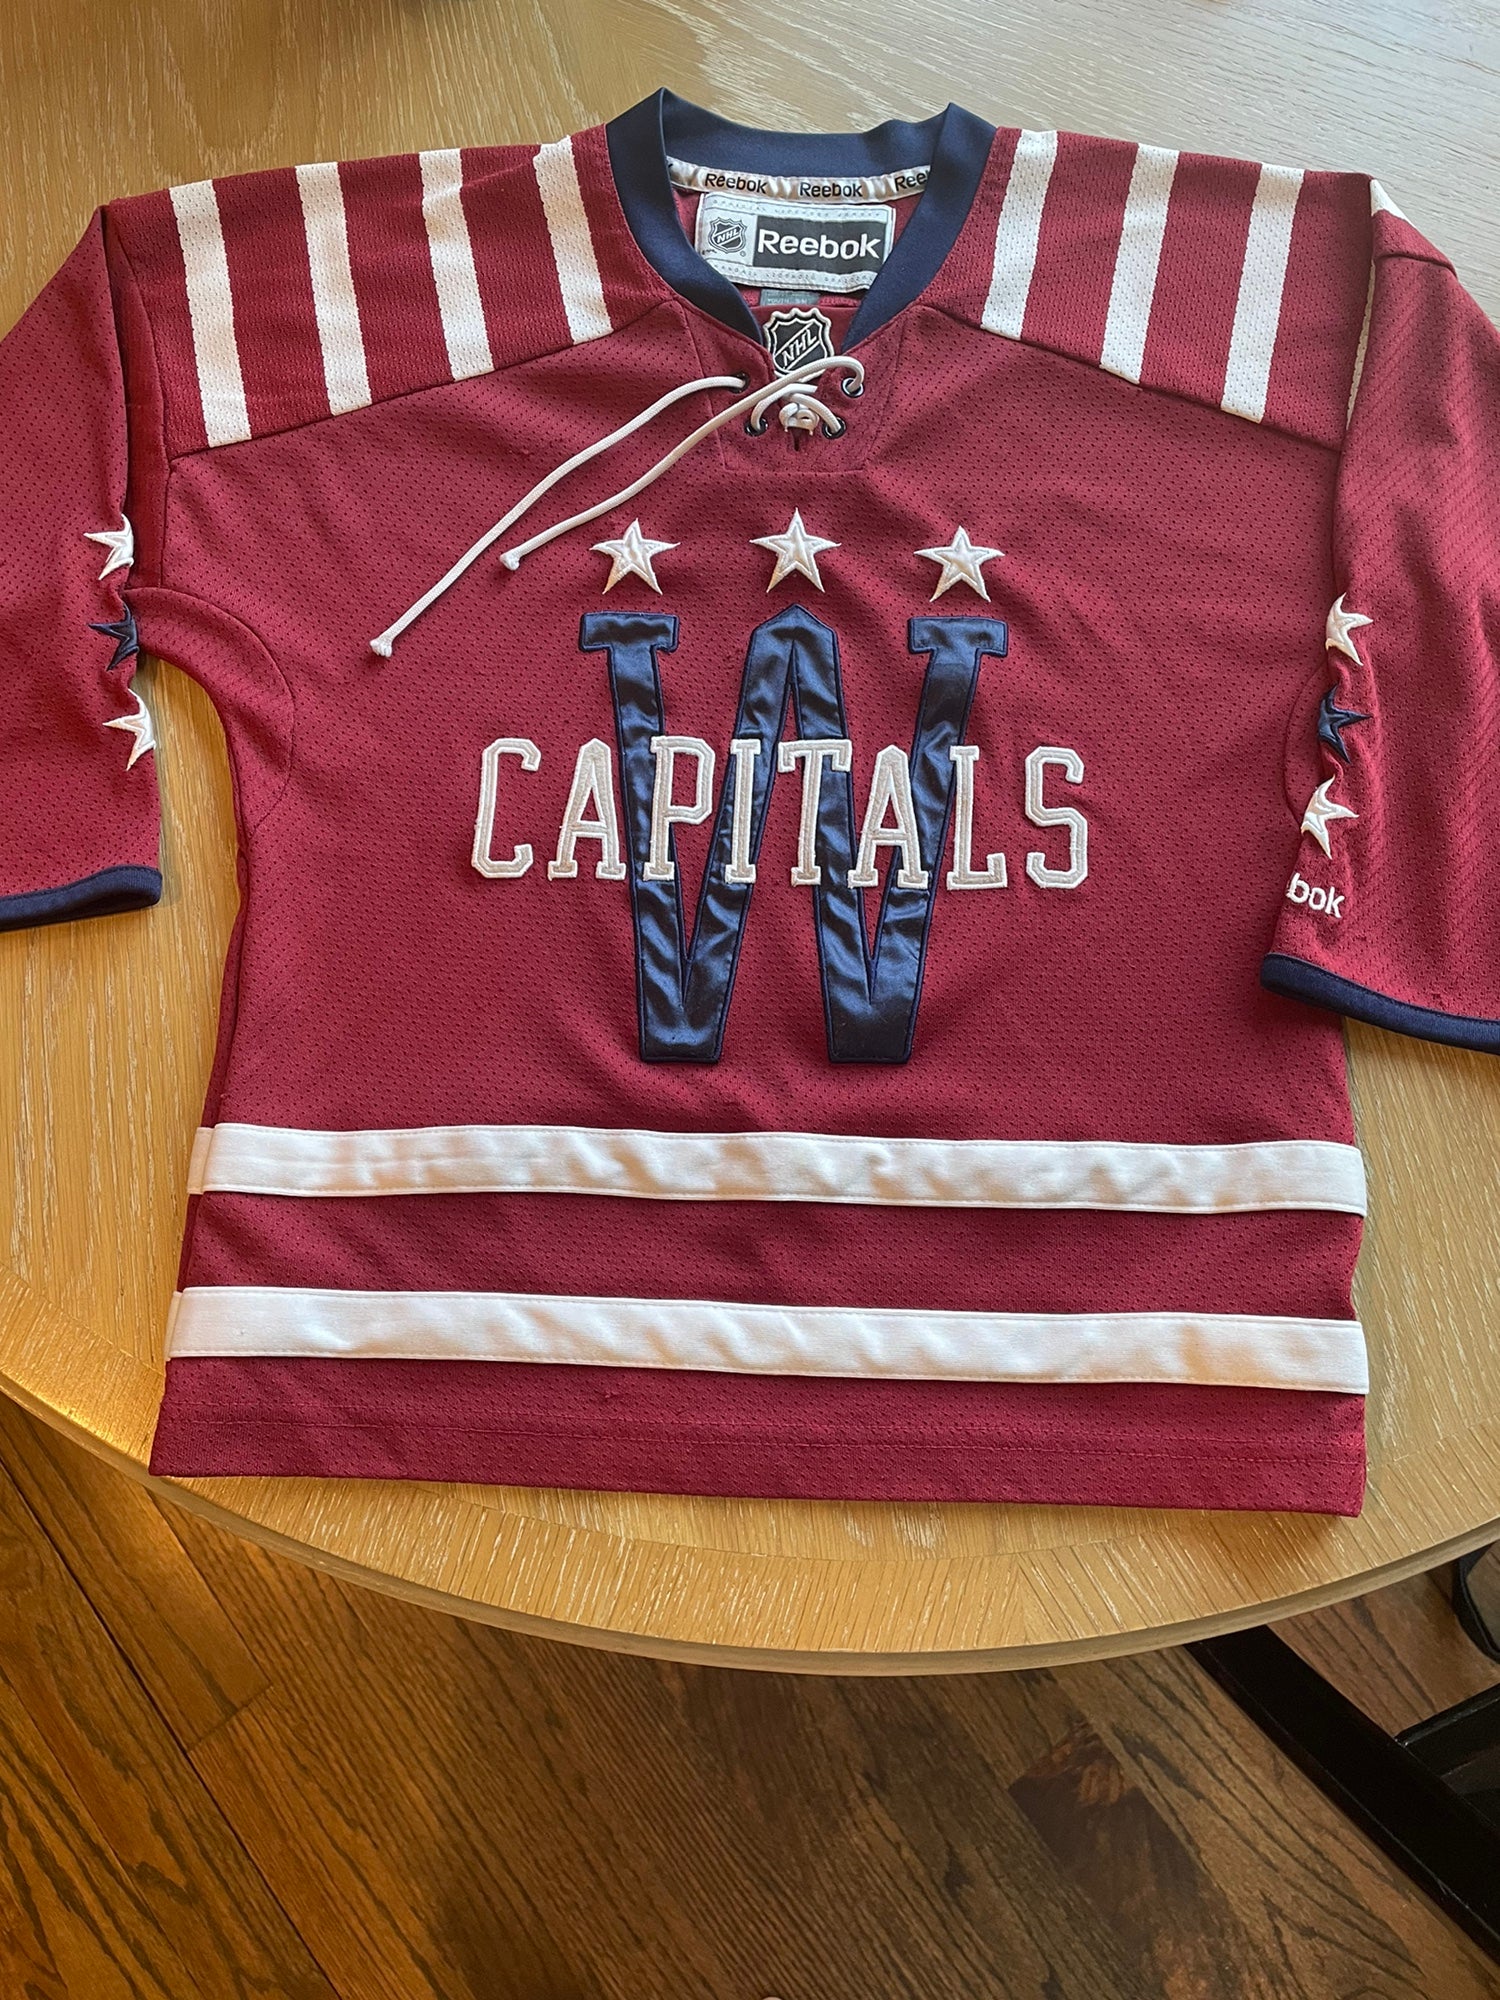 Washington Capitals Reebok Practice Jersey for Sale in Antioch, CA - OfferUp